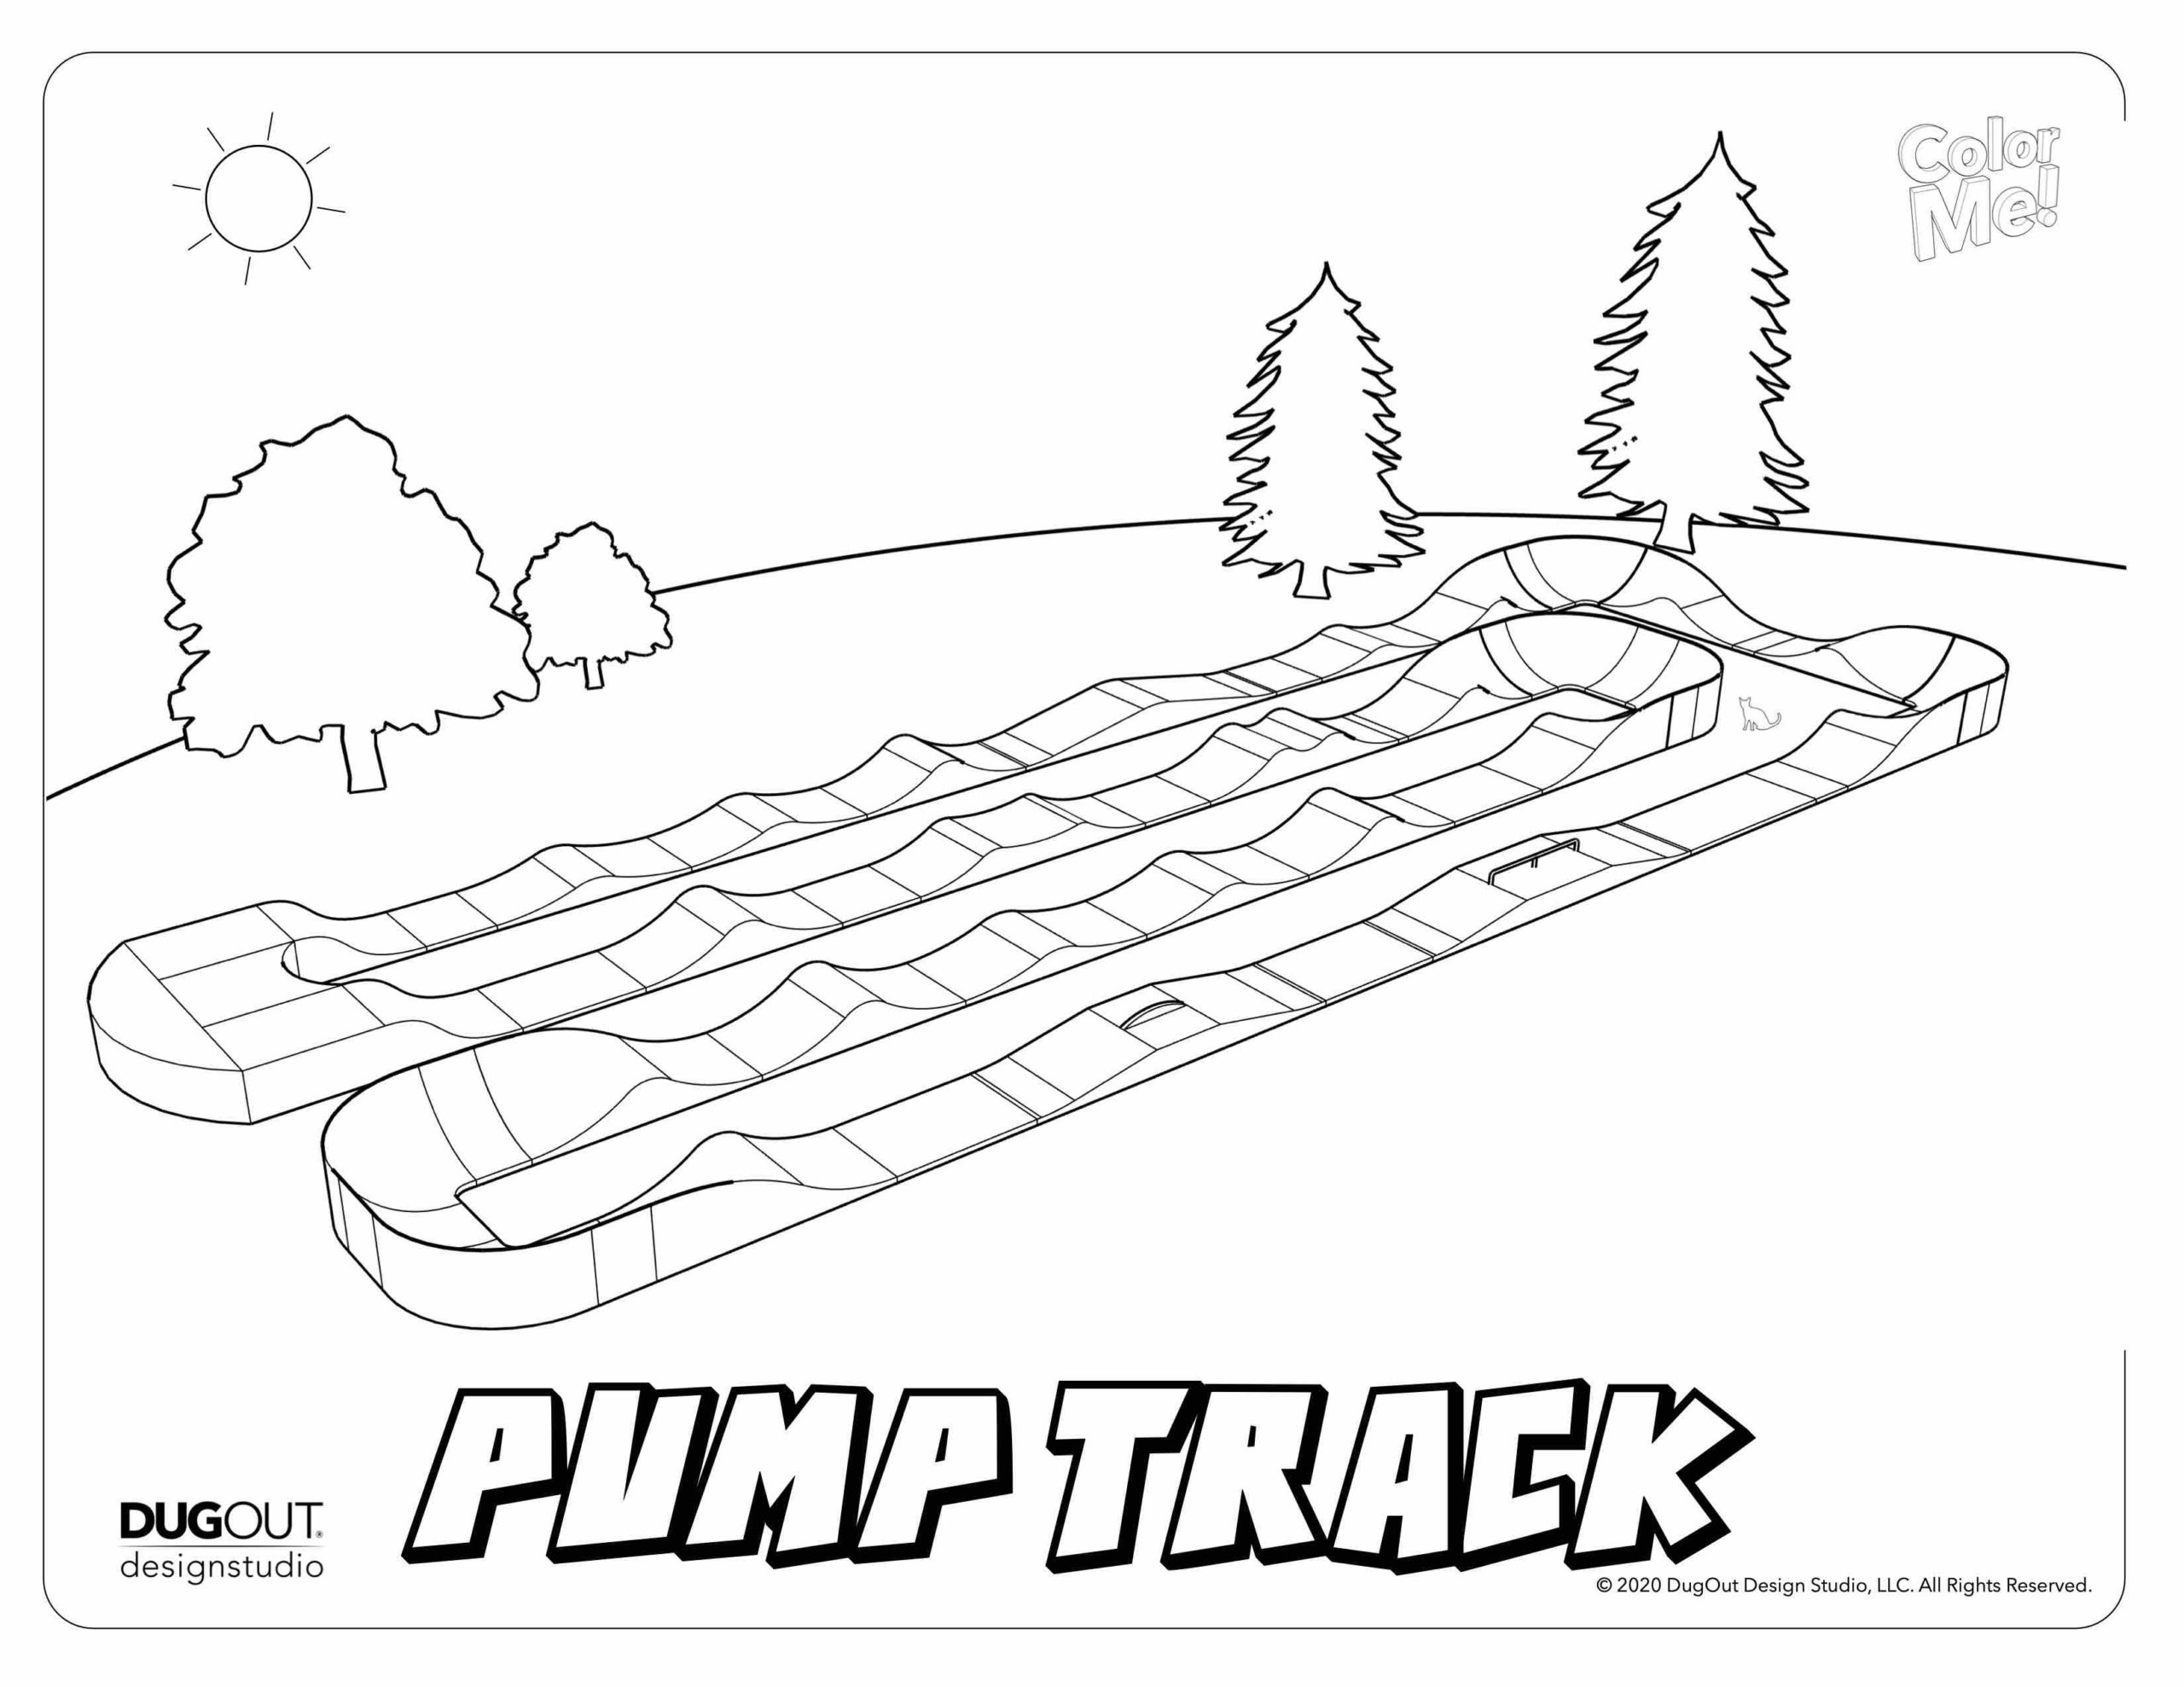 Free coloring and activity book for future skatepark designers